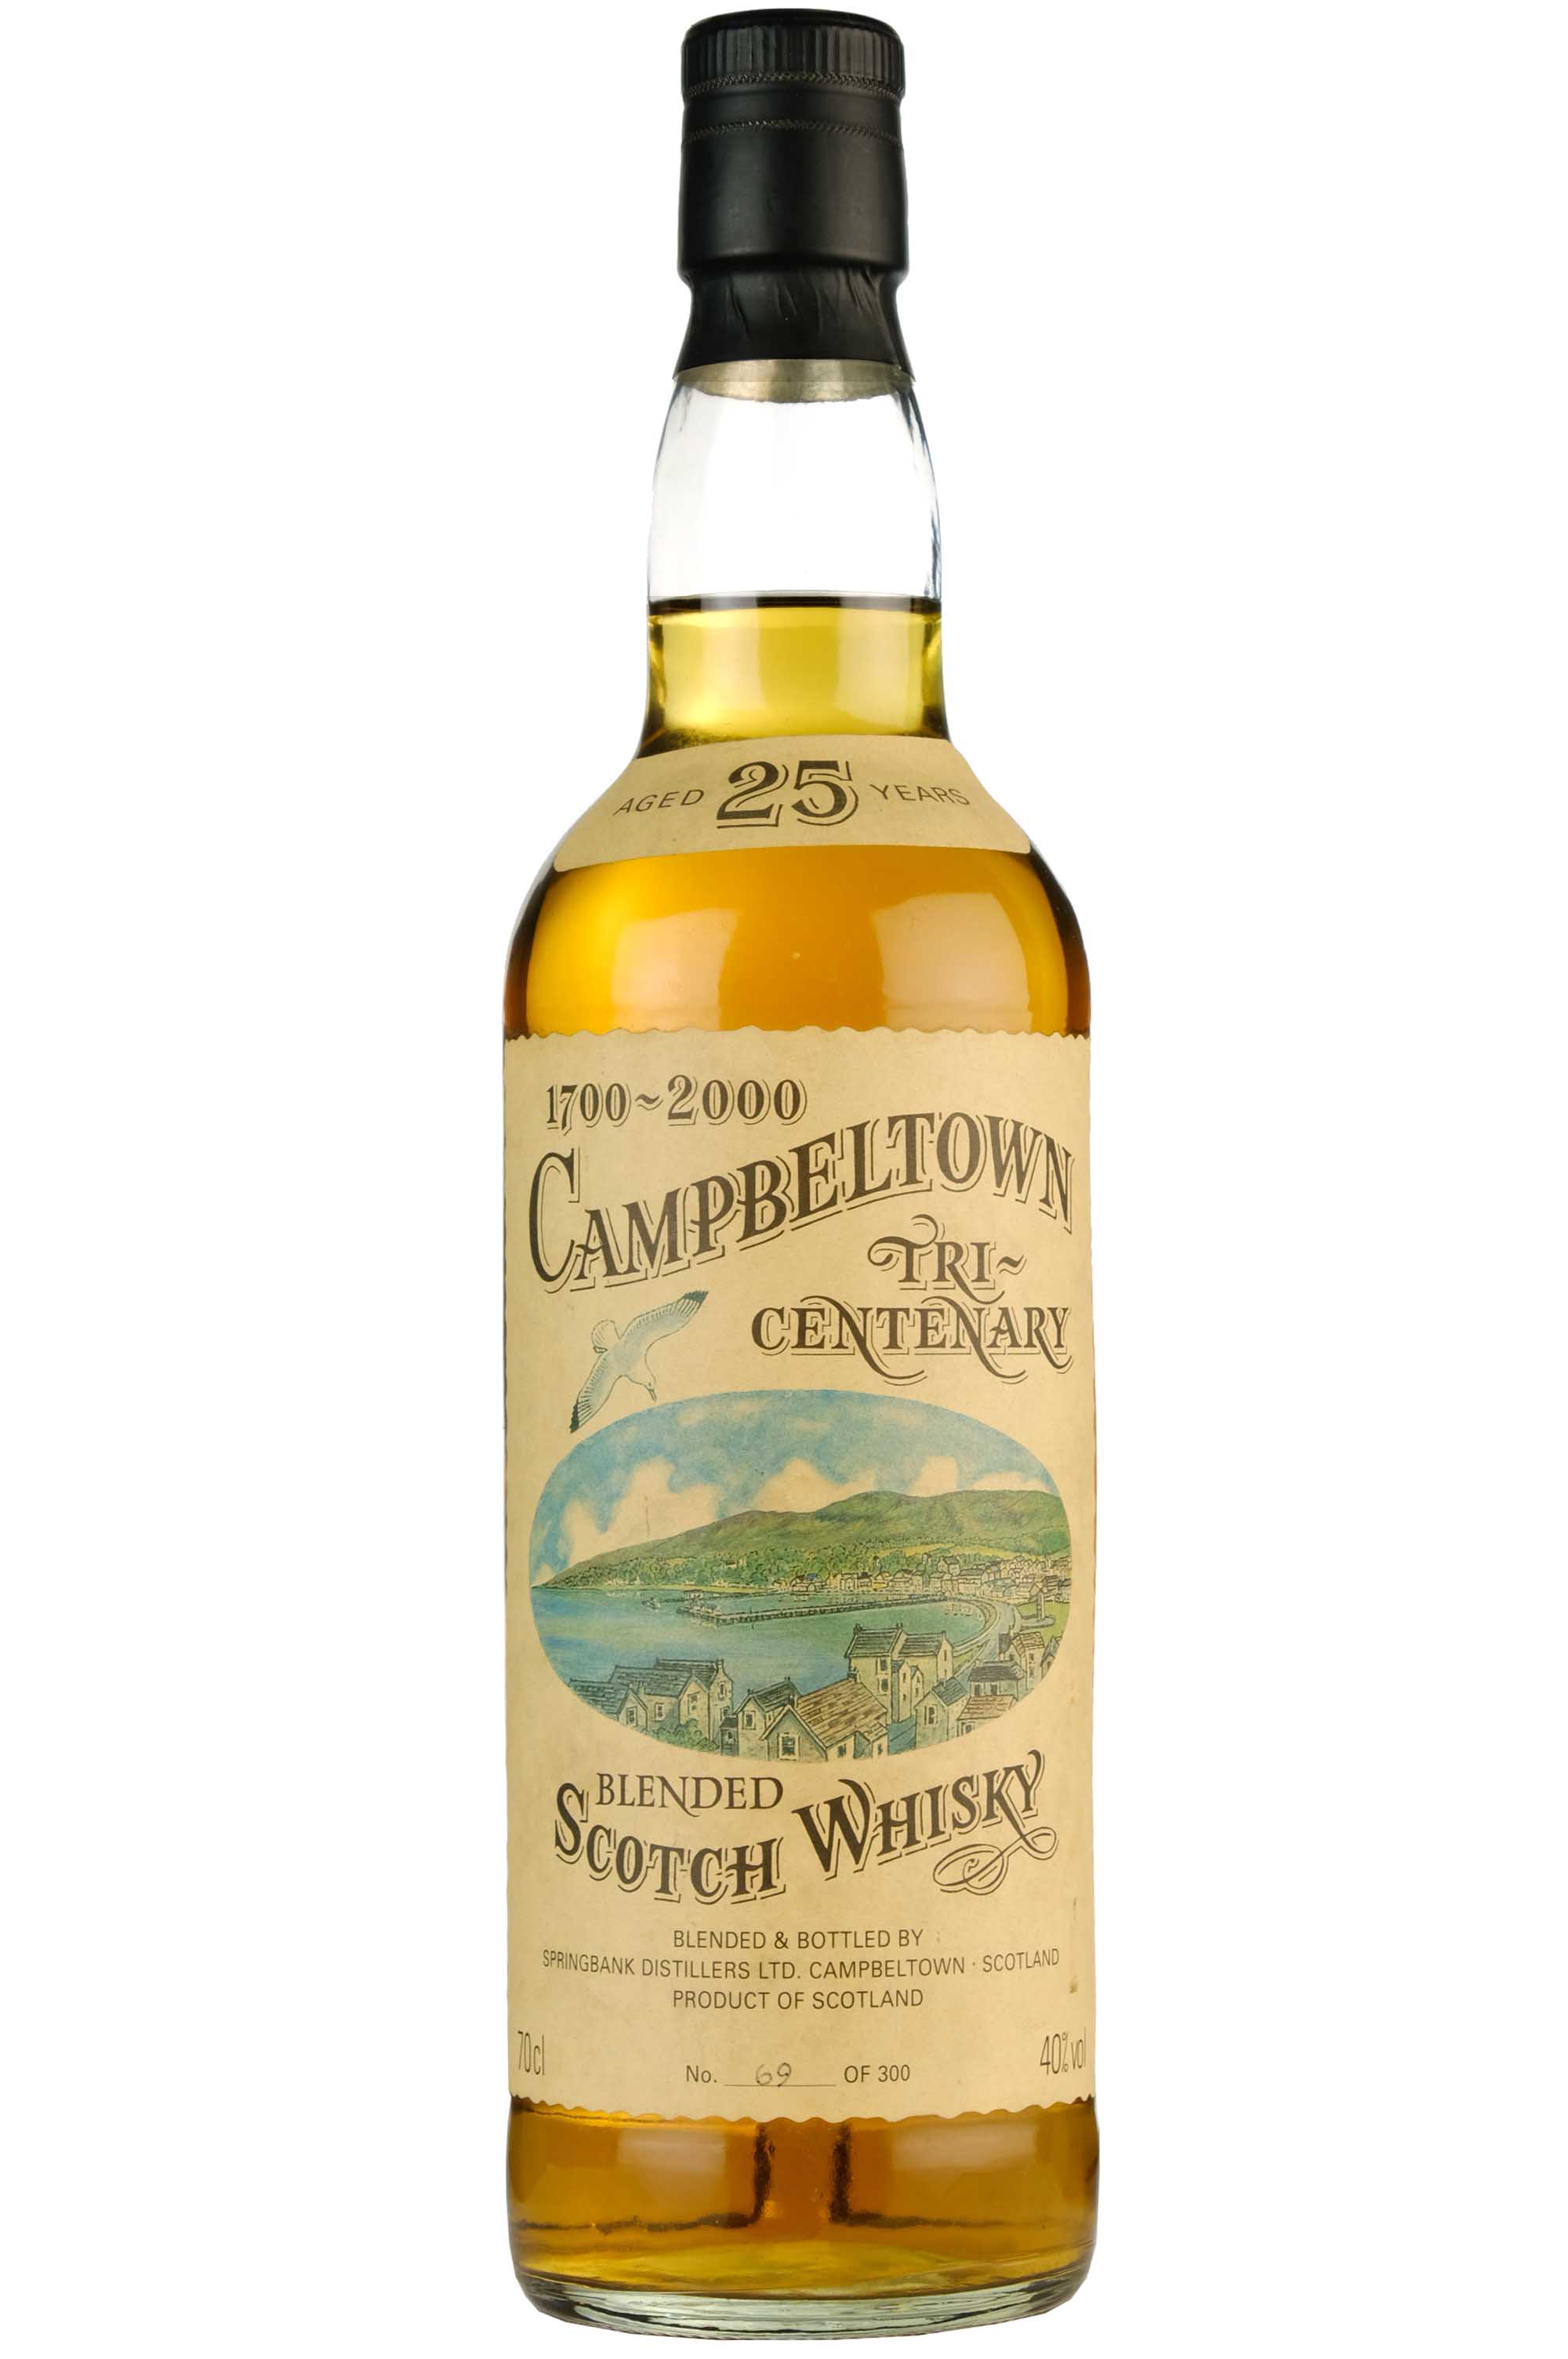 Campbeltown 25 Year Old | Tri-Centenary 1700-2000